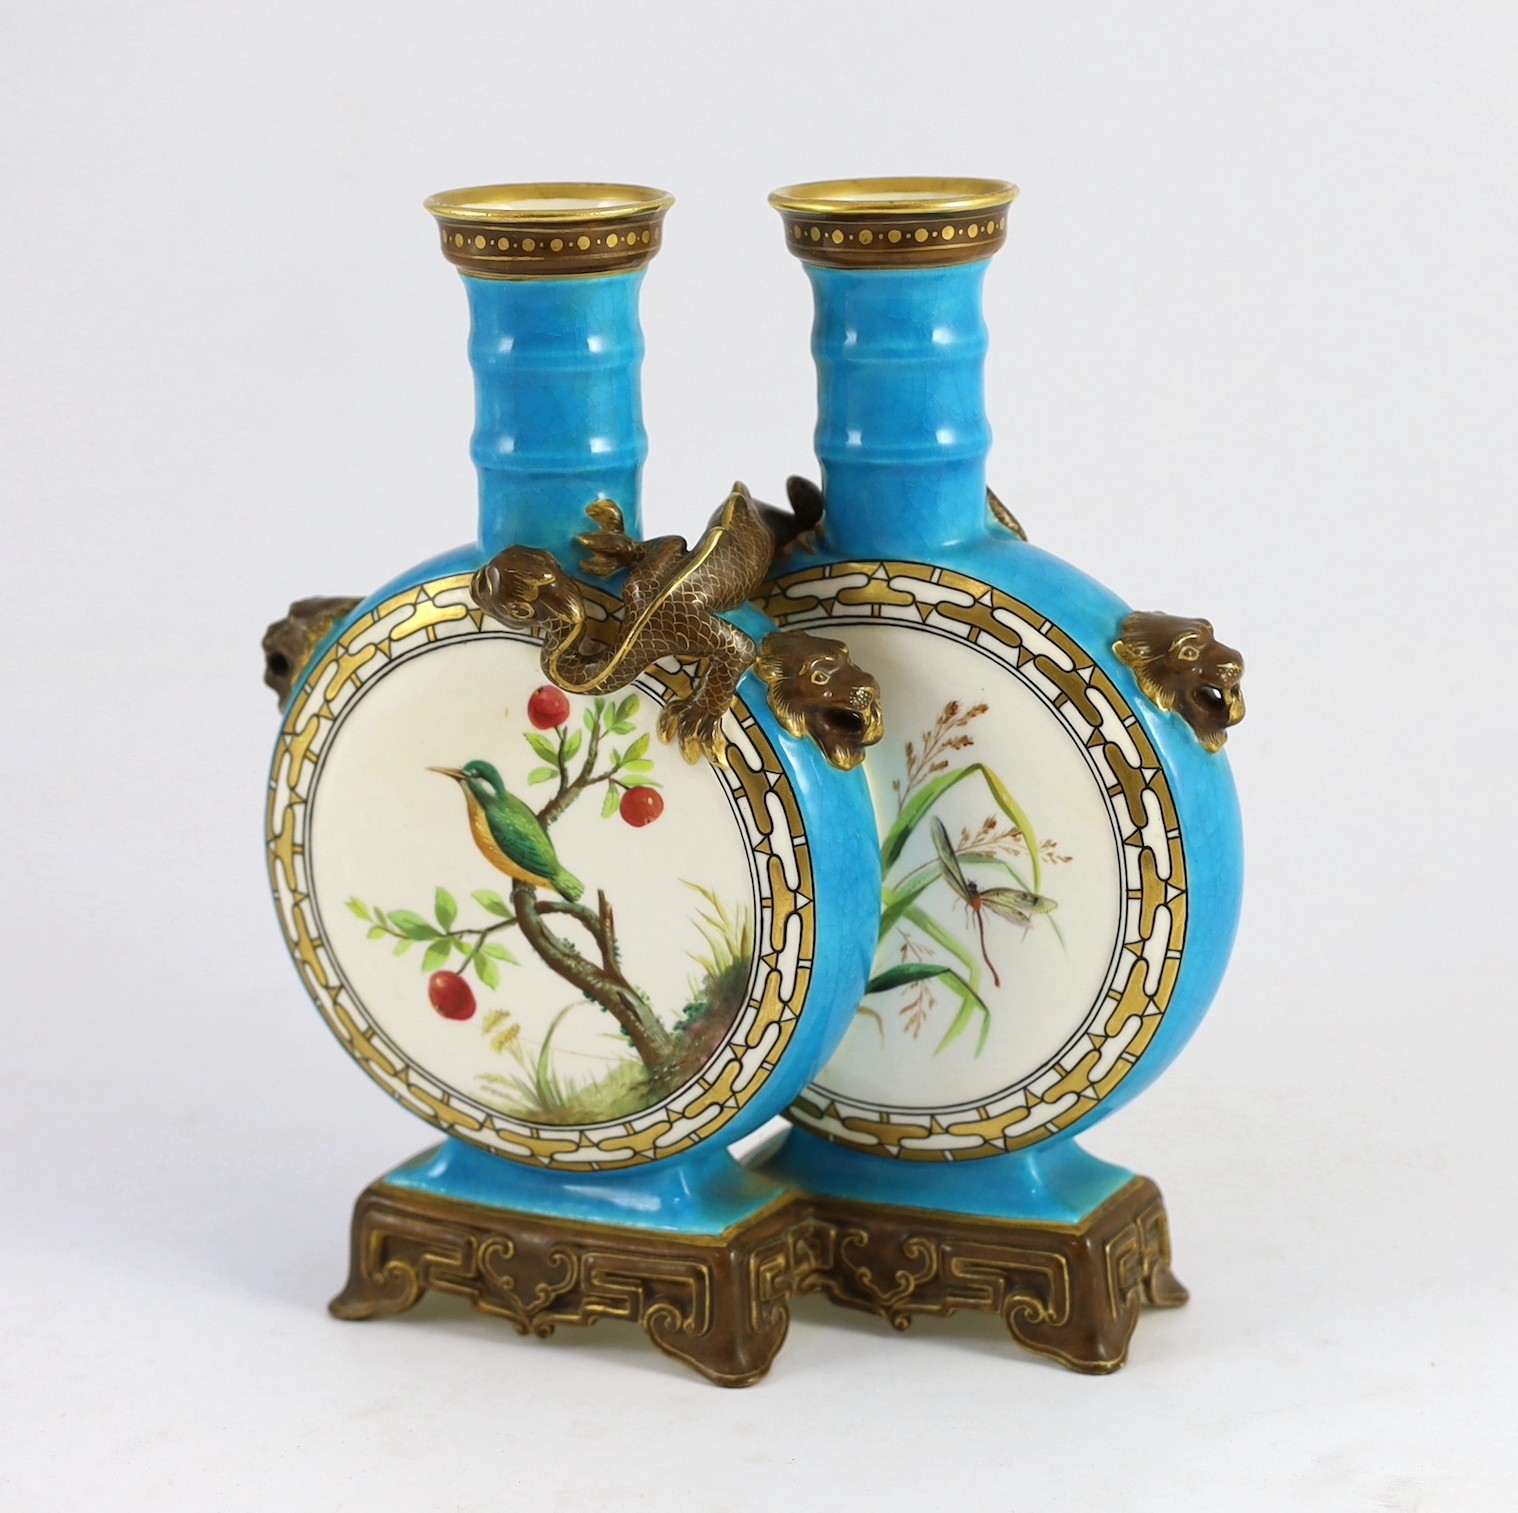 A rare Mintons Aesthetic period porcelain double moon flask, manner of Dr. Christopher Dresser, 21.8cm high